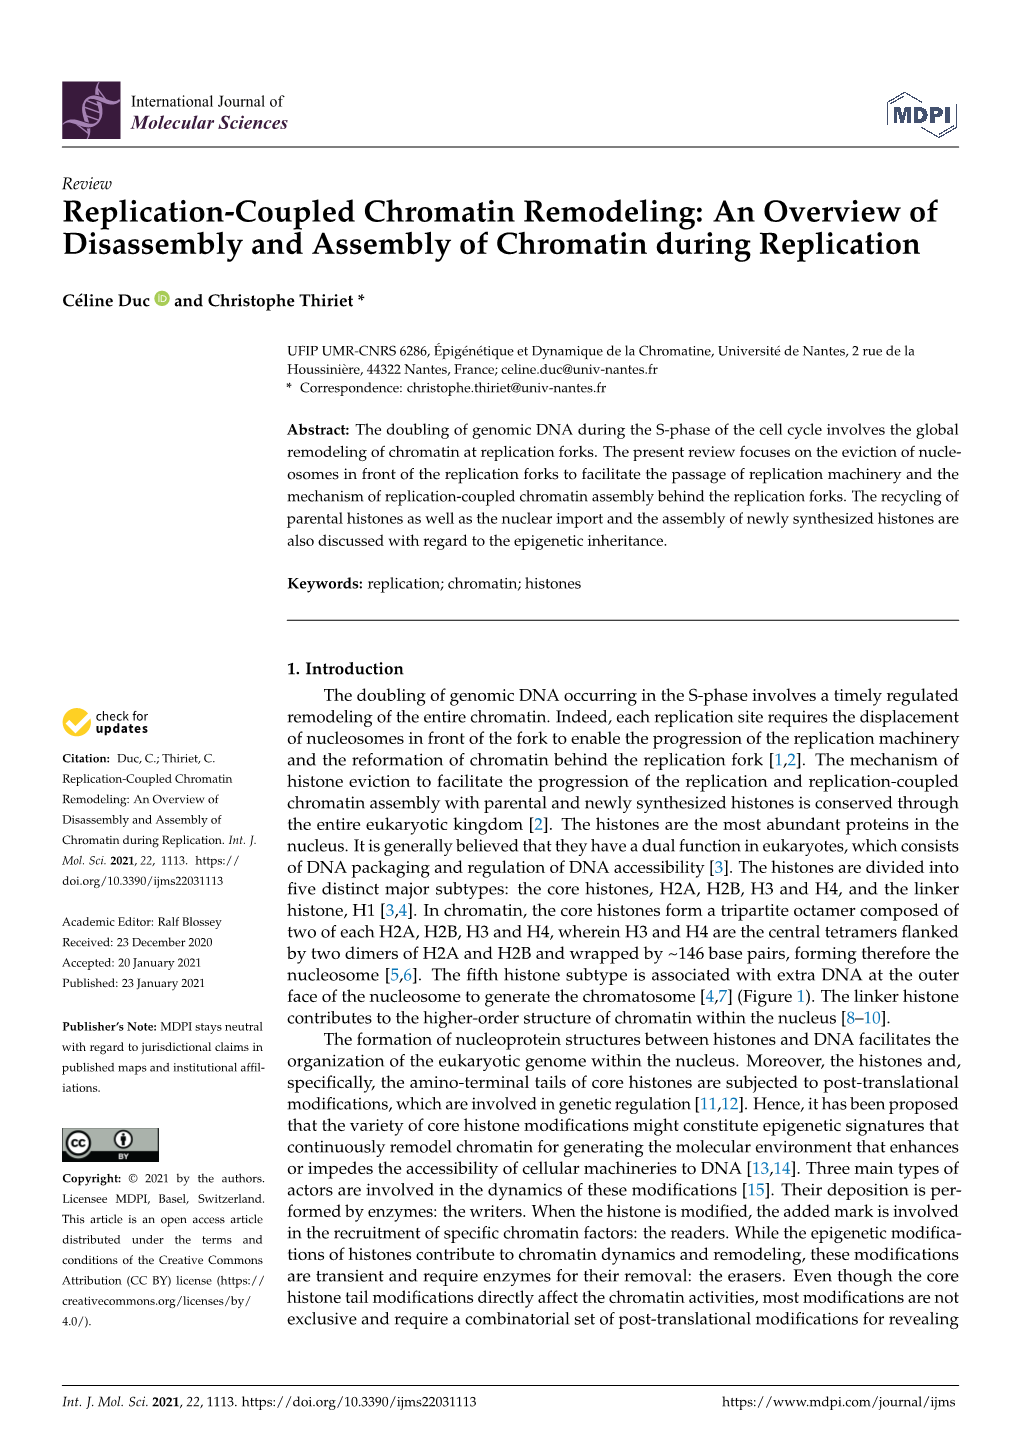 Replication-Coupled Chromatin Remodeling: an Overview of Disassembly and Assembly of Chromatin During Replication